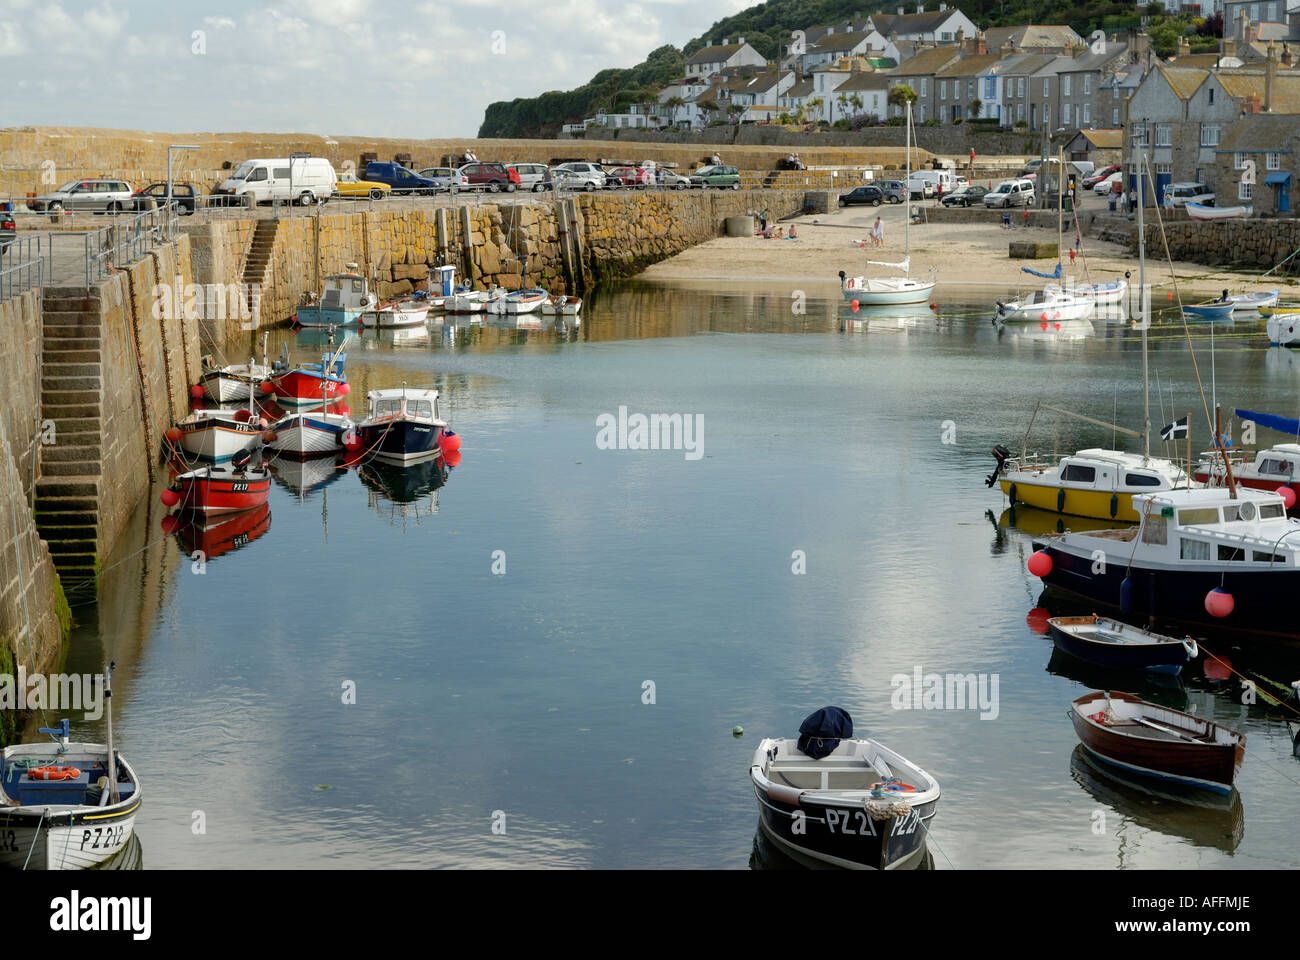 Mousehole harbour West Cornwall Angelboote/Fischerboote am Kai Stockfoto